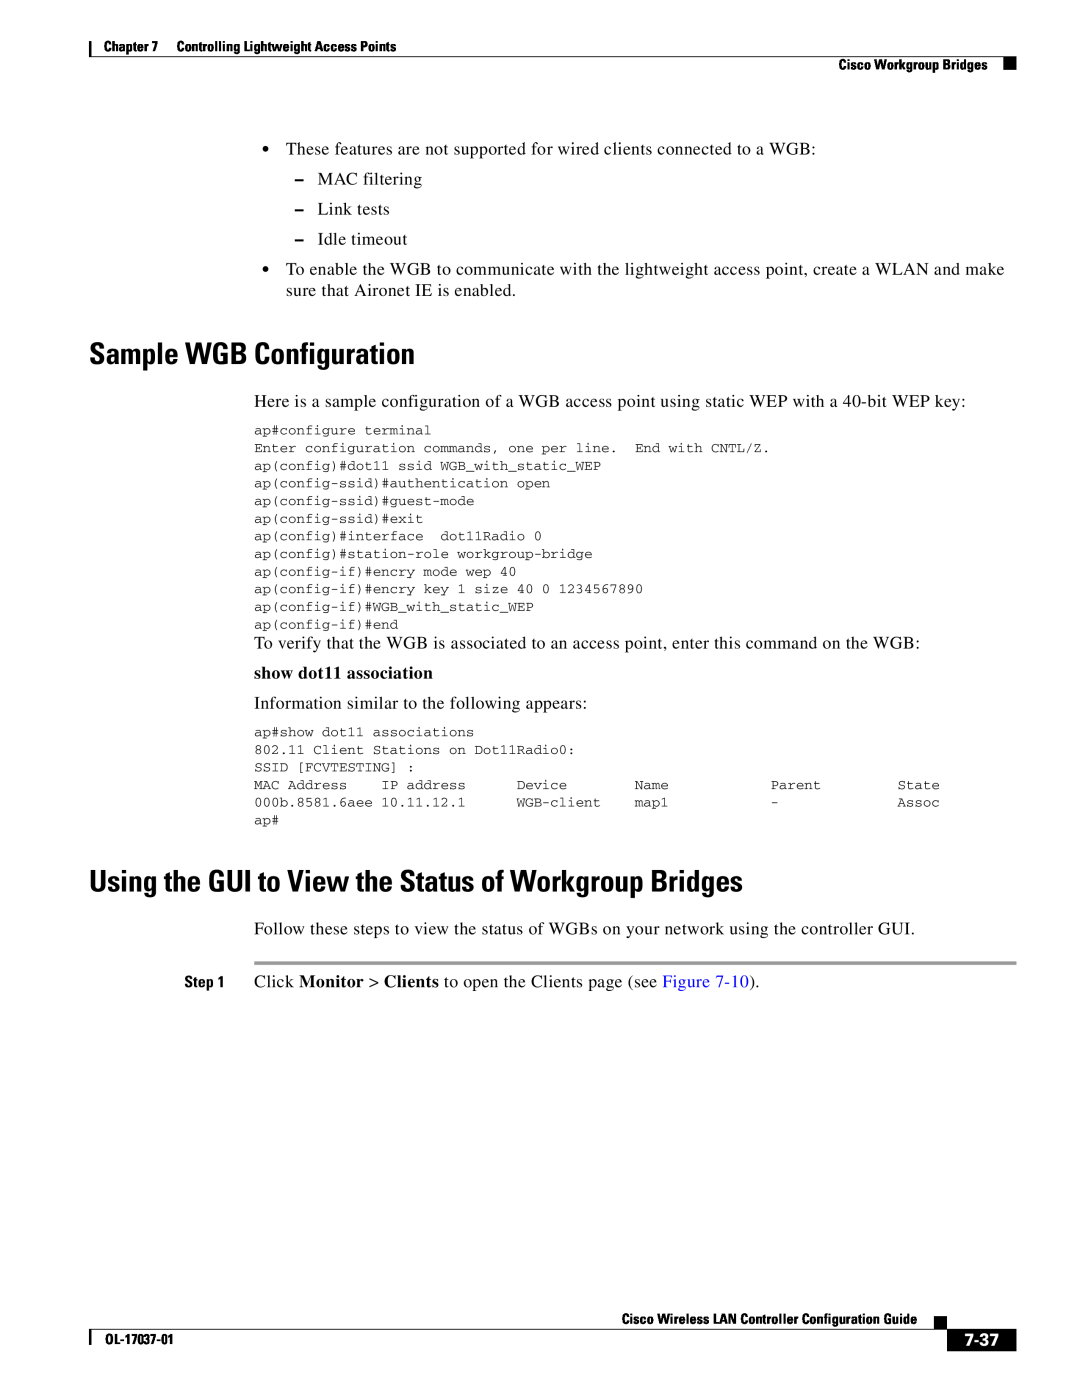 Cisco Systems OL-17037-01 manual Sample WGB Configuration, Using the GUI to View the Status of Workgroup Bridges, 7-37 